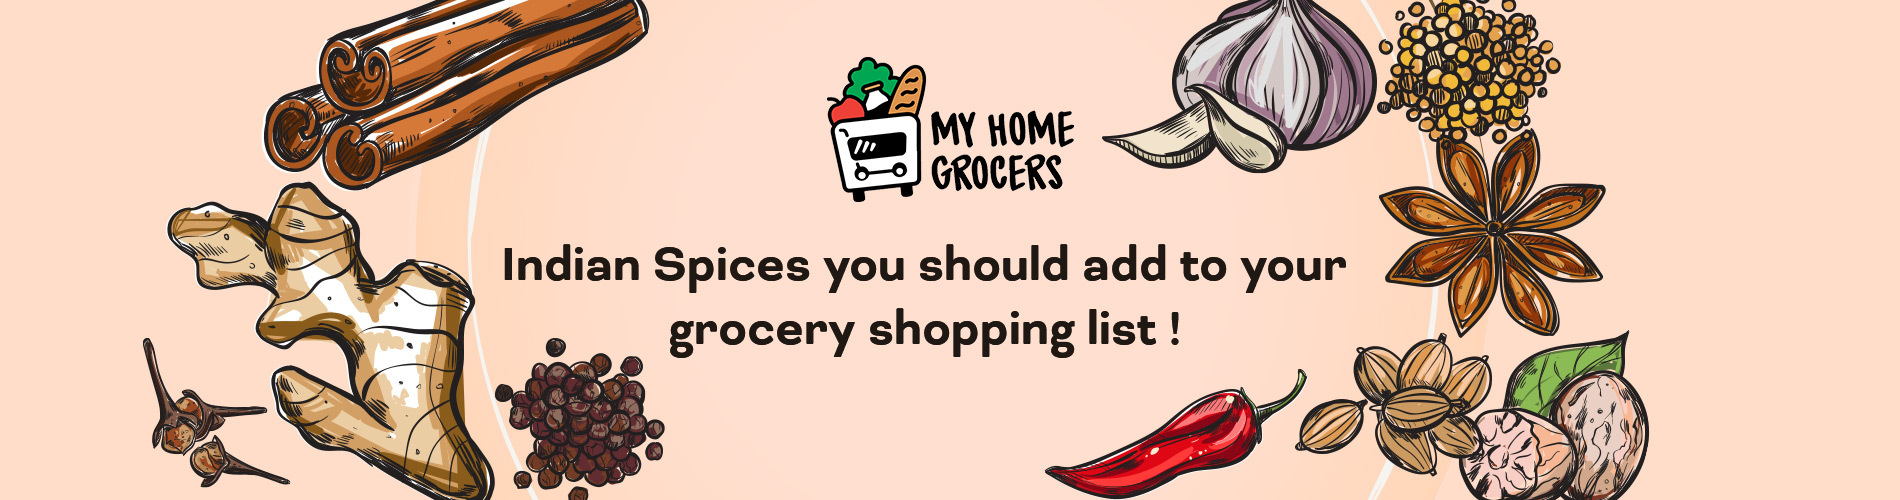 Indian Spices you should add to your grocery shopping list